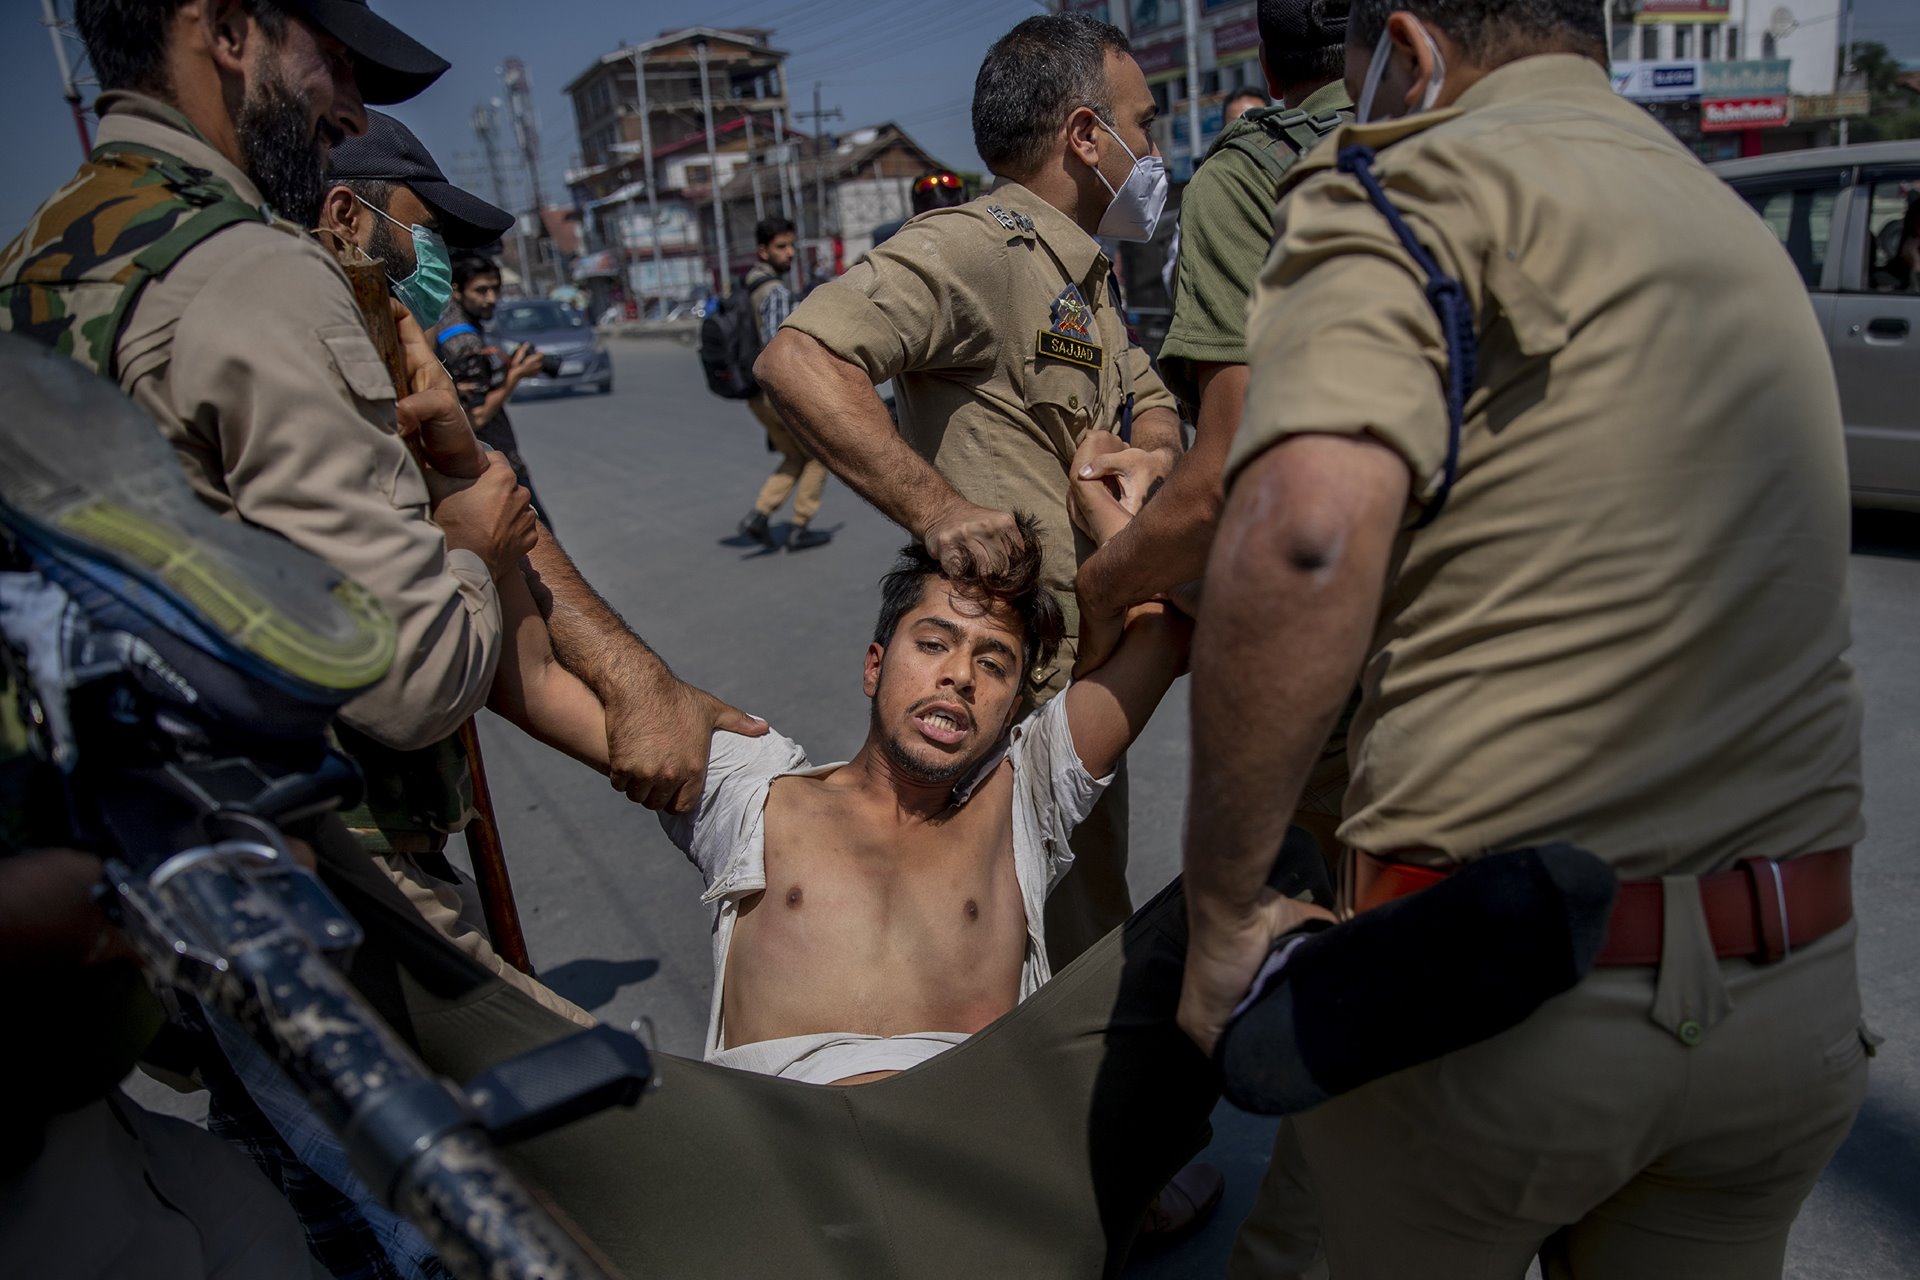 Indian policemen detain a man for participating in a religious procession in central Srinagar, Indian-administered Kashmir. Police fired tear gas and warning shots to disperse hundreds of Shia Muslims, while detaining dozens who attempted to participate in processions marking the holy month of Muharram.